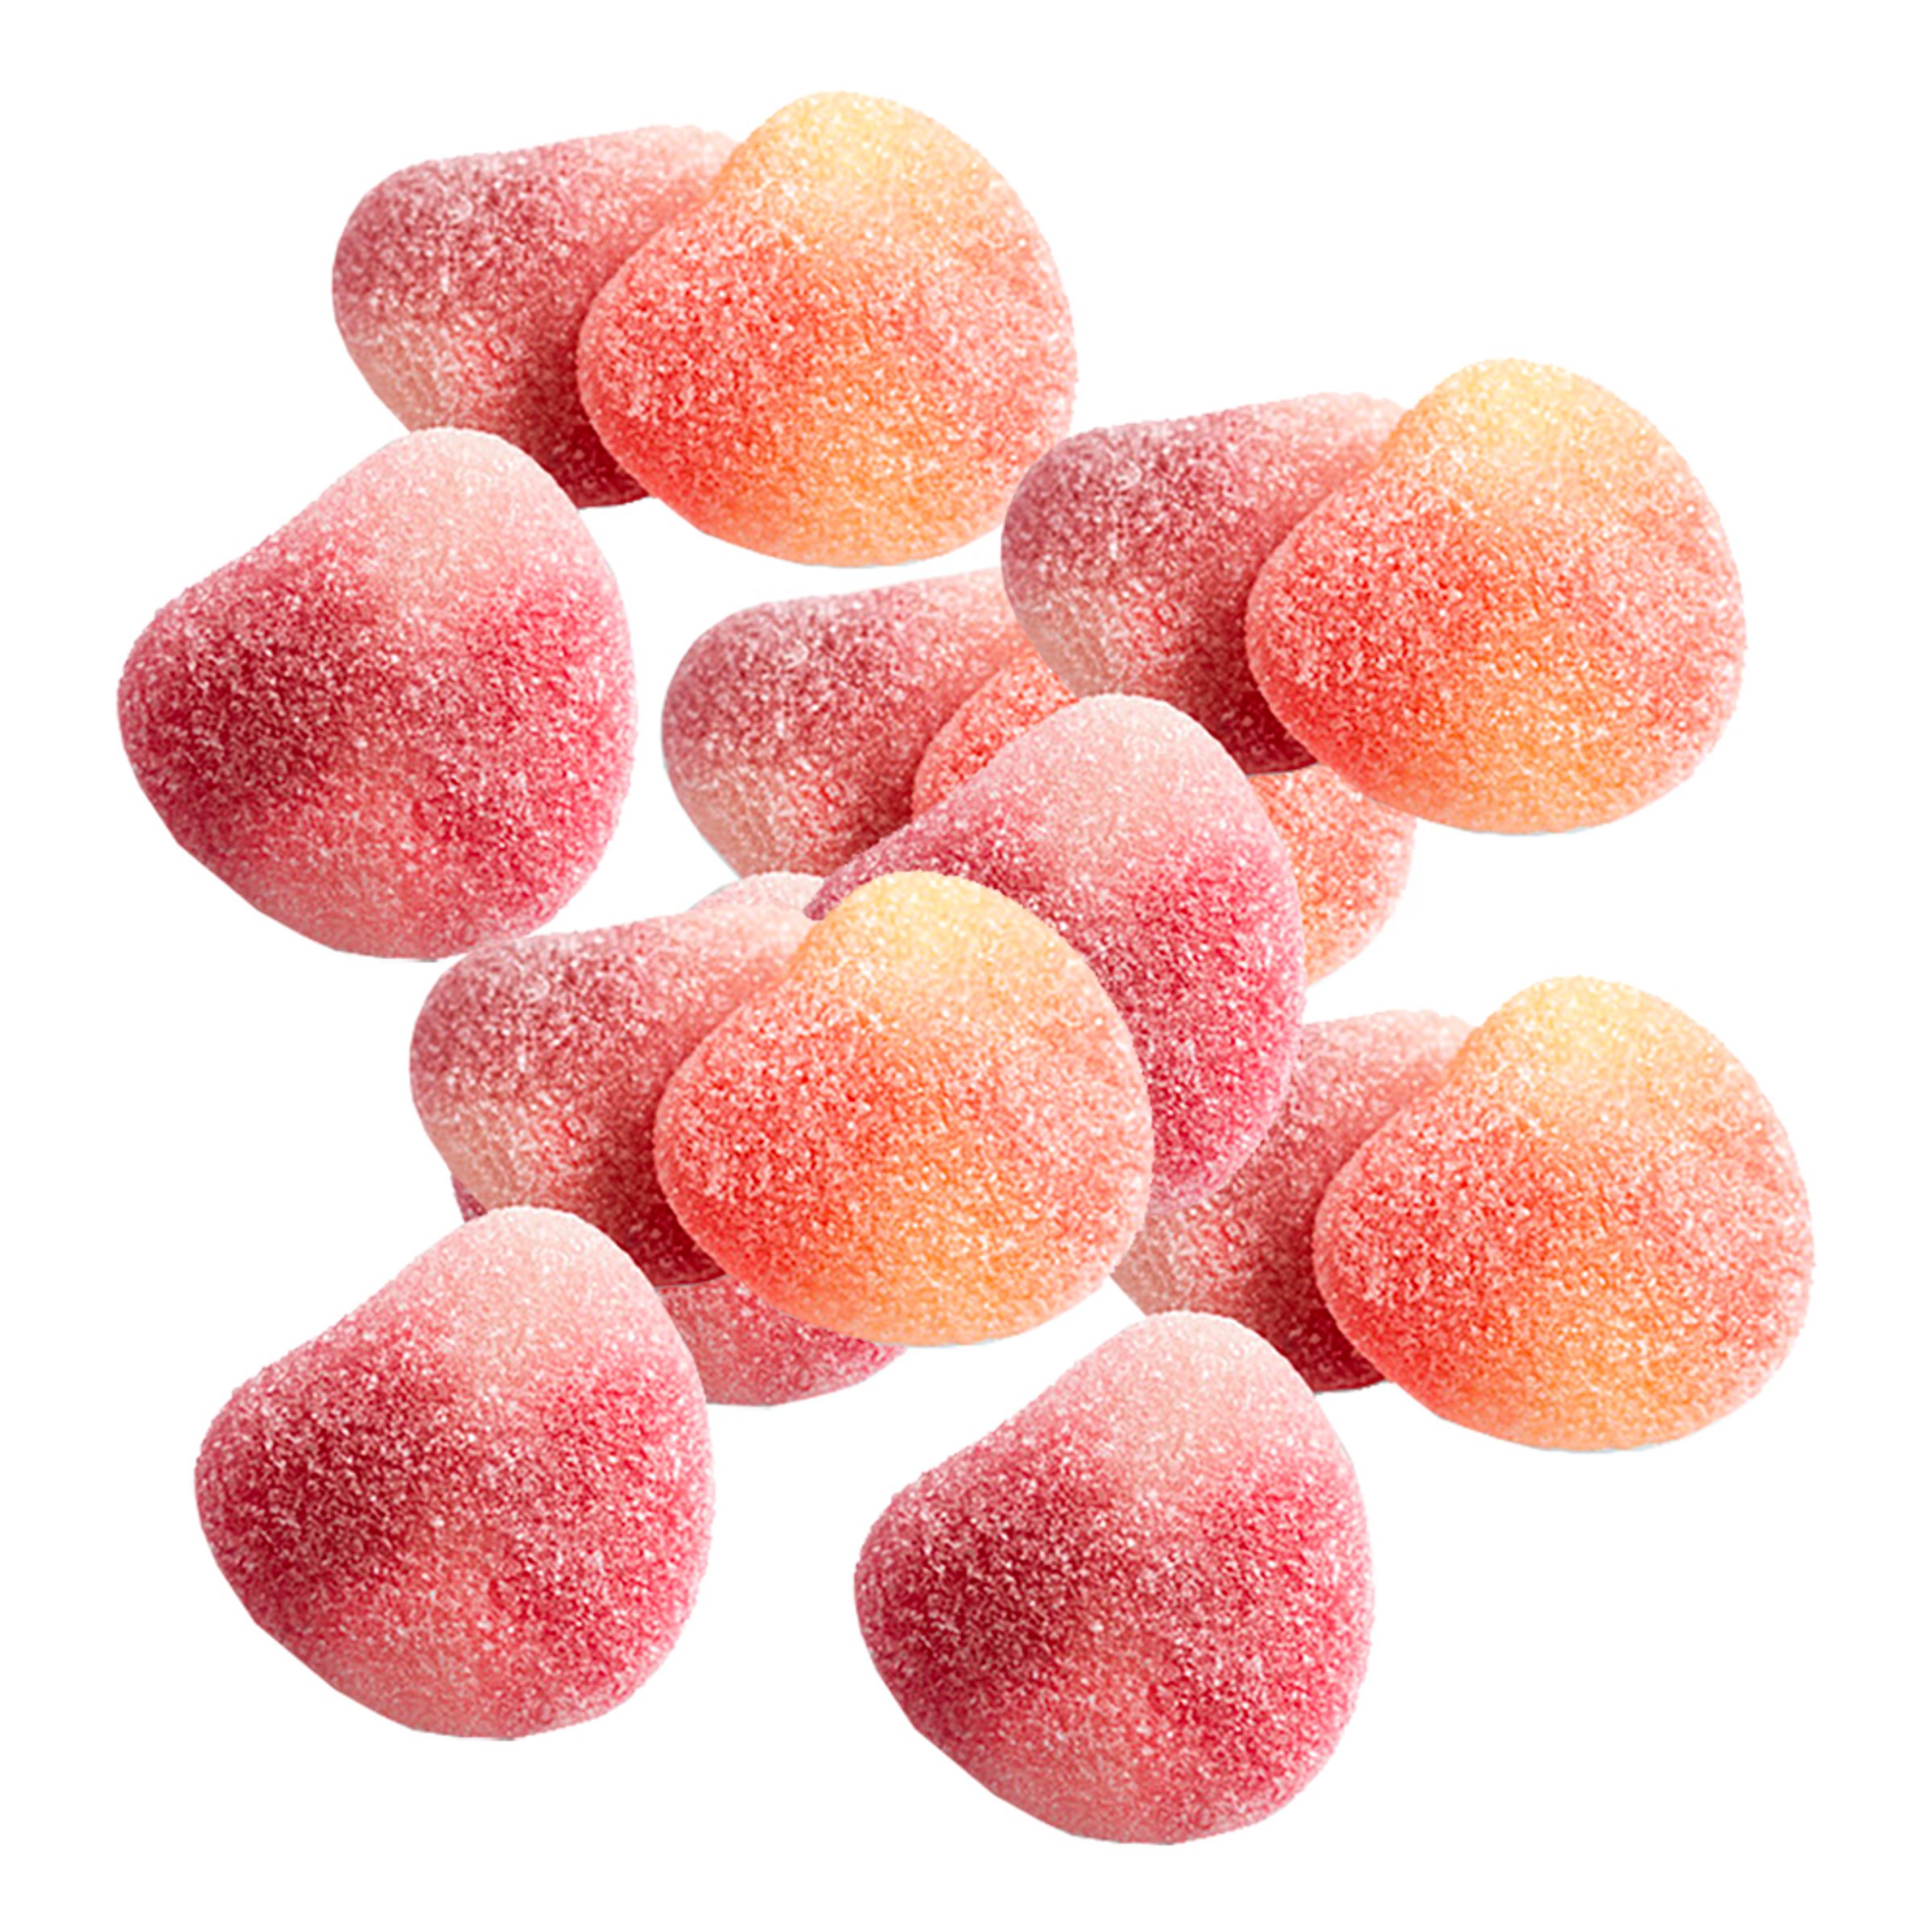 Persikor/Peaches i Storpack - 2,4 kg